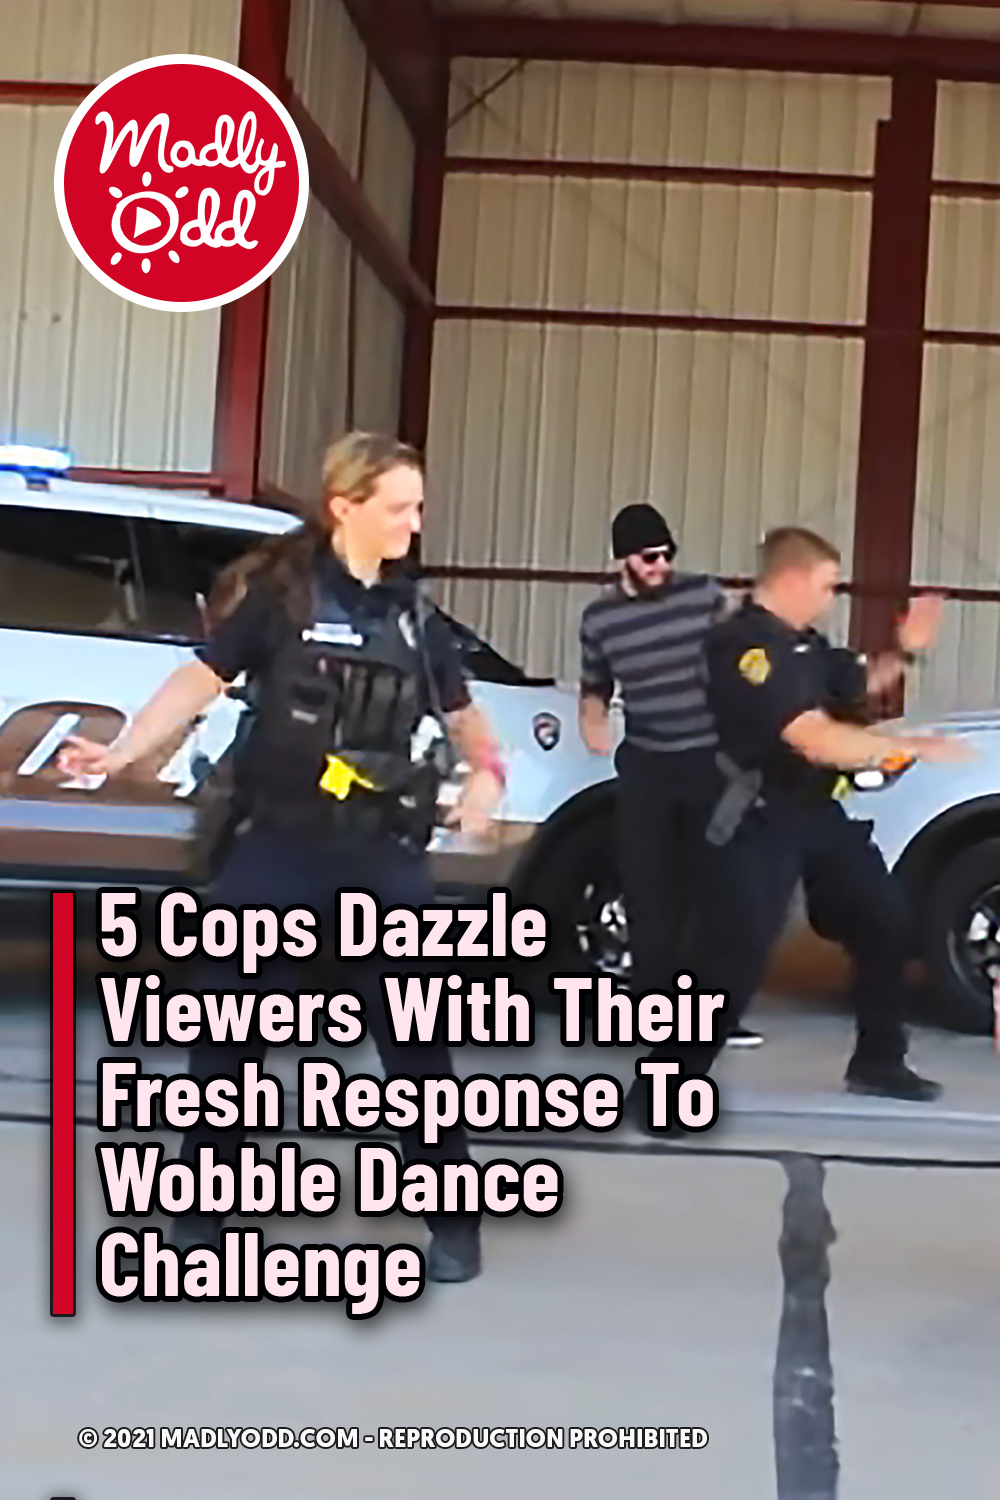 5 Cops Dazzle Viewers With Their Fresh Response To Wobble Dance Challenge